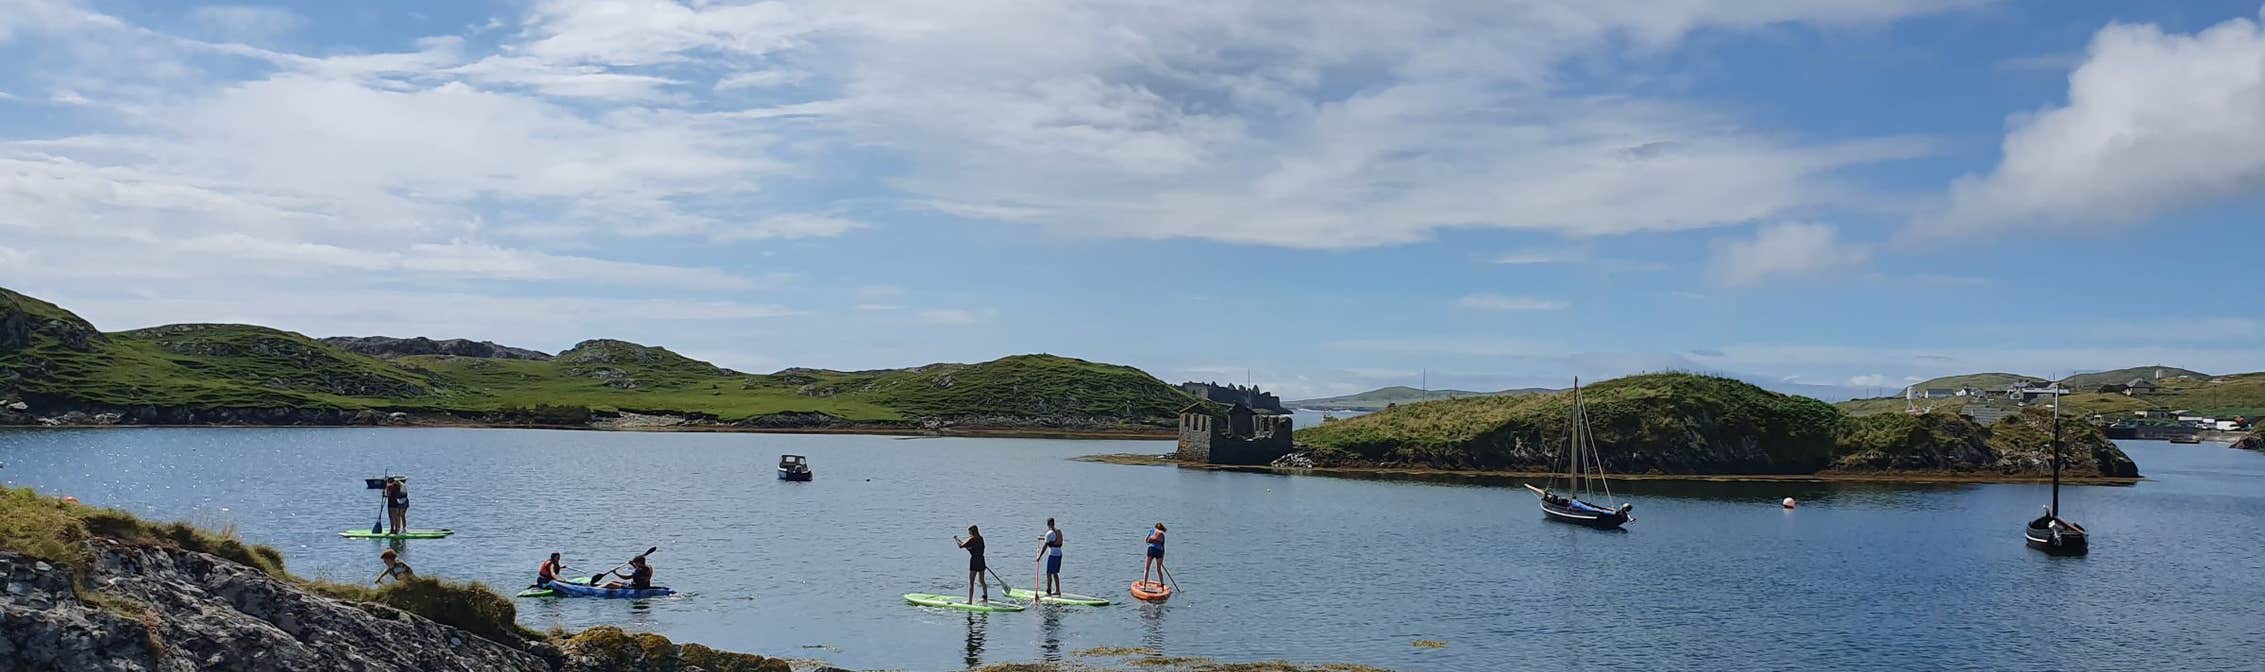 Paddle boarding at Inishbofin Island, County Galway